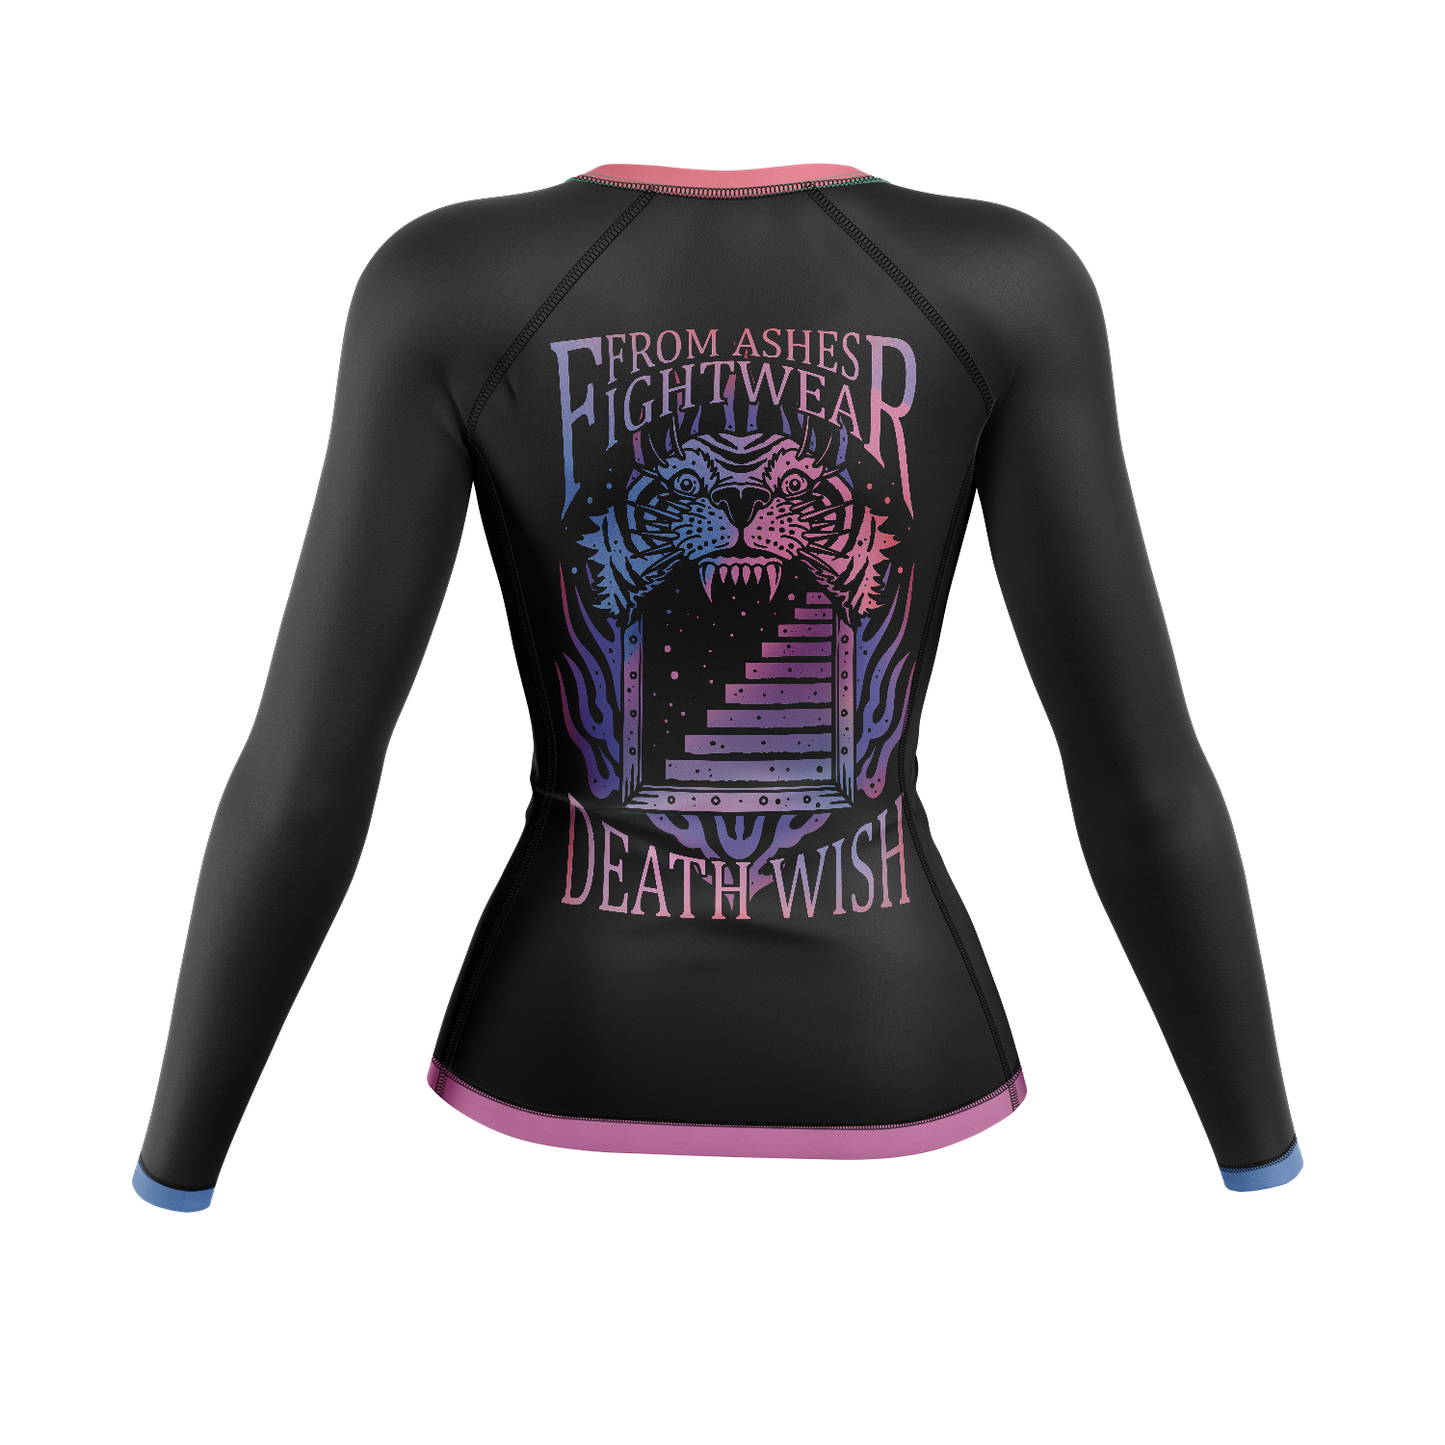 From Ashes Fightwear women's rash guard Death Wish, gradient and black